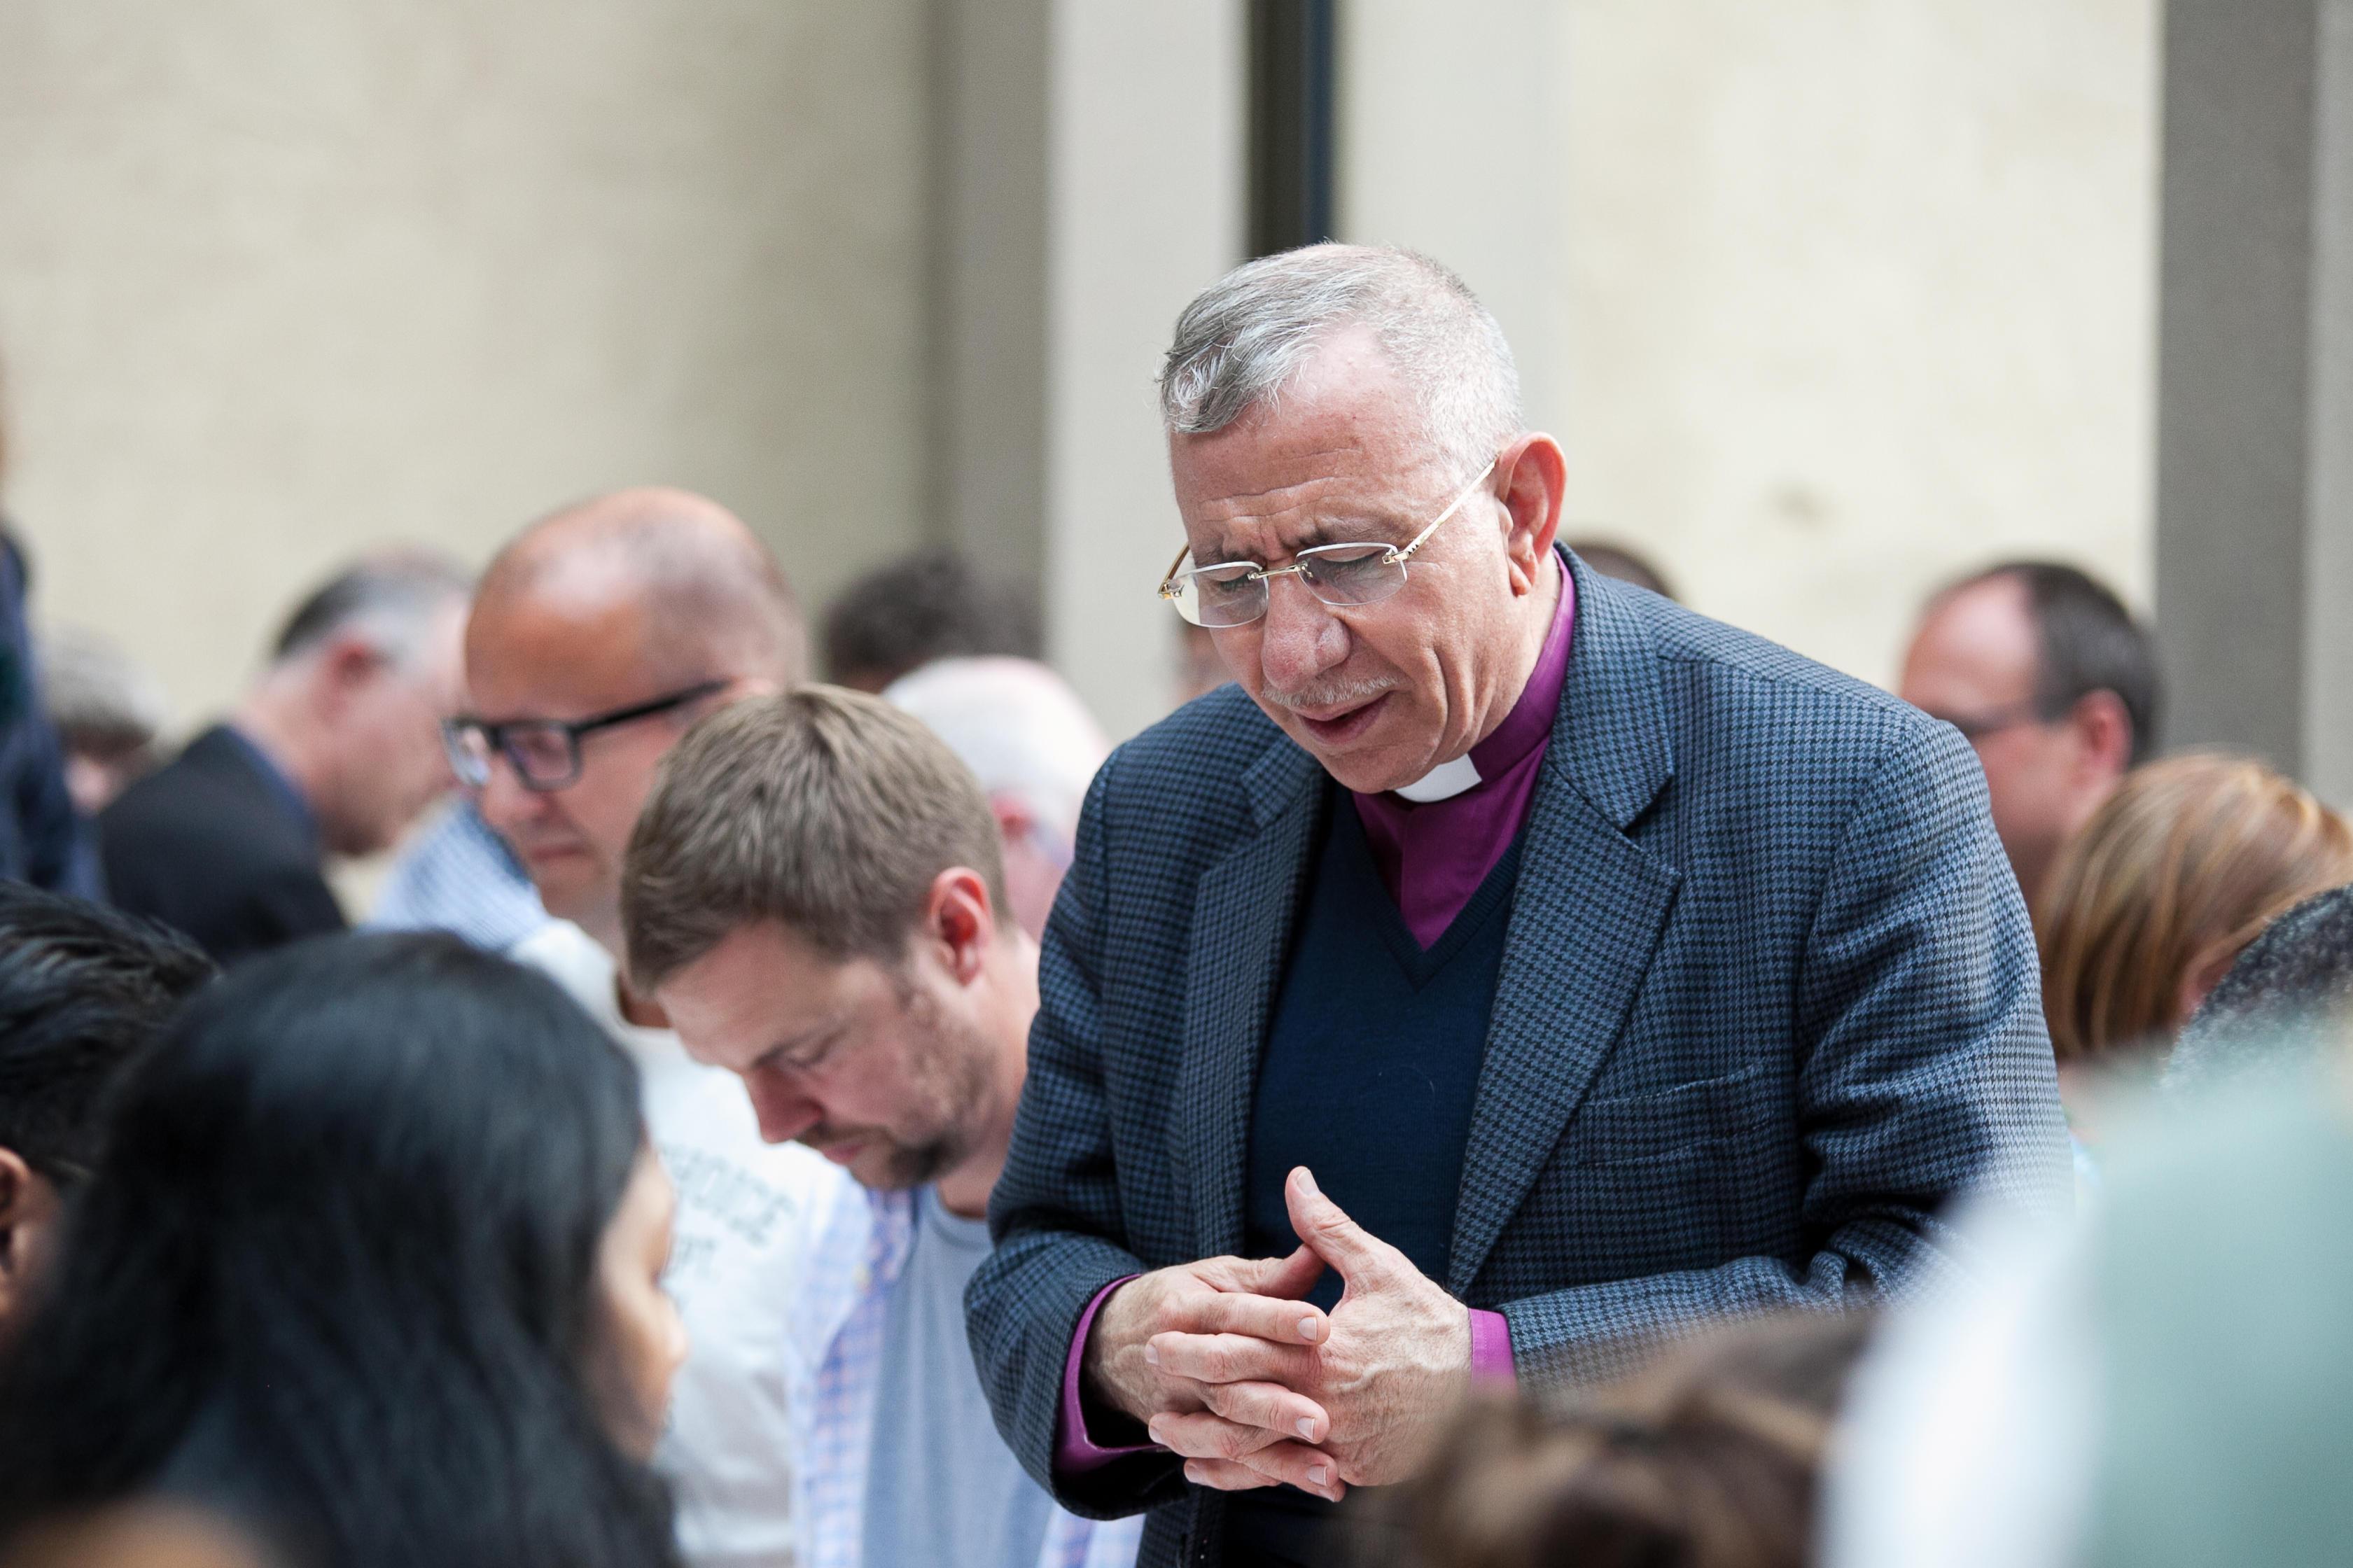 Bishop Dr. Munib Younan, President of the Lutheran World Federation, saying grace at the 2016 LWF Council in Wittenberg. Photo: LWF / Marko Schoeneberg